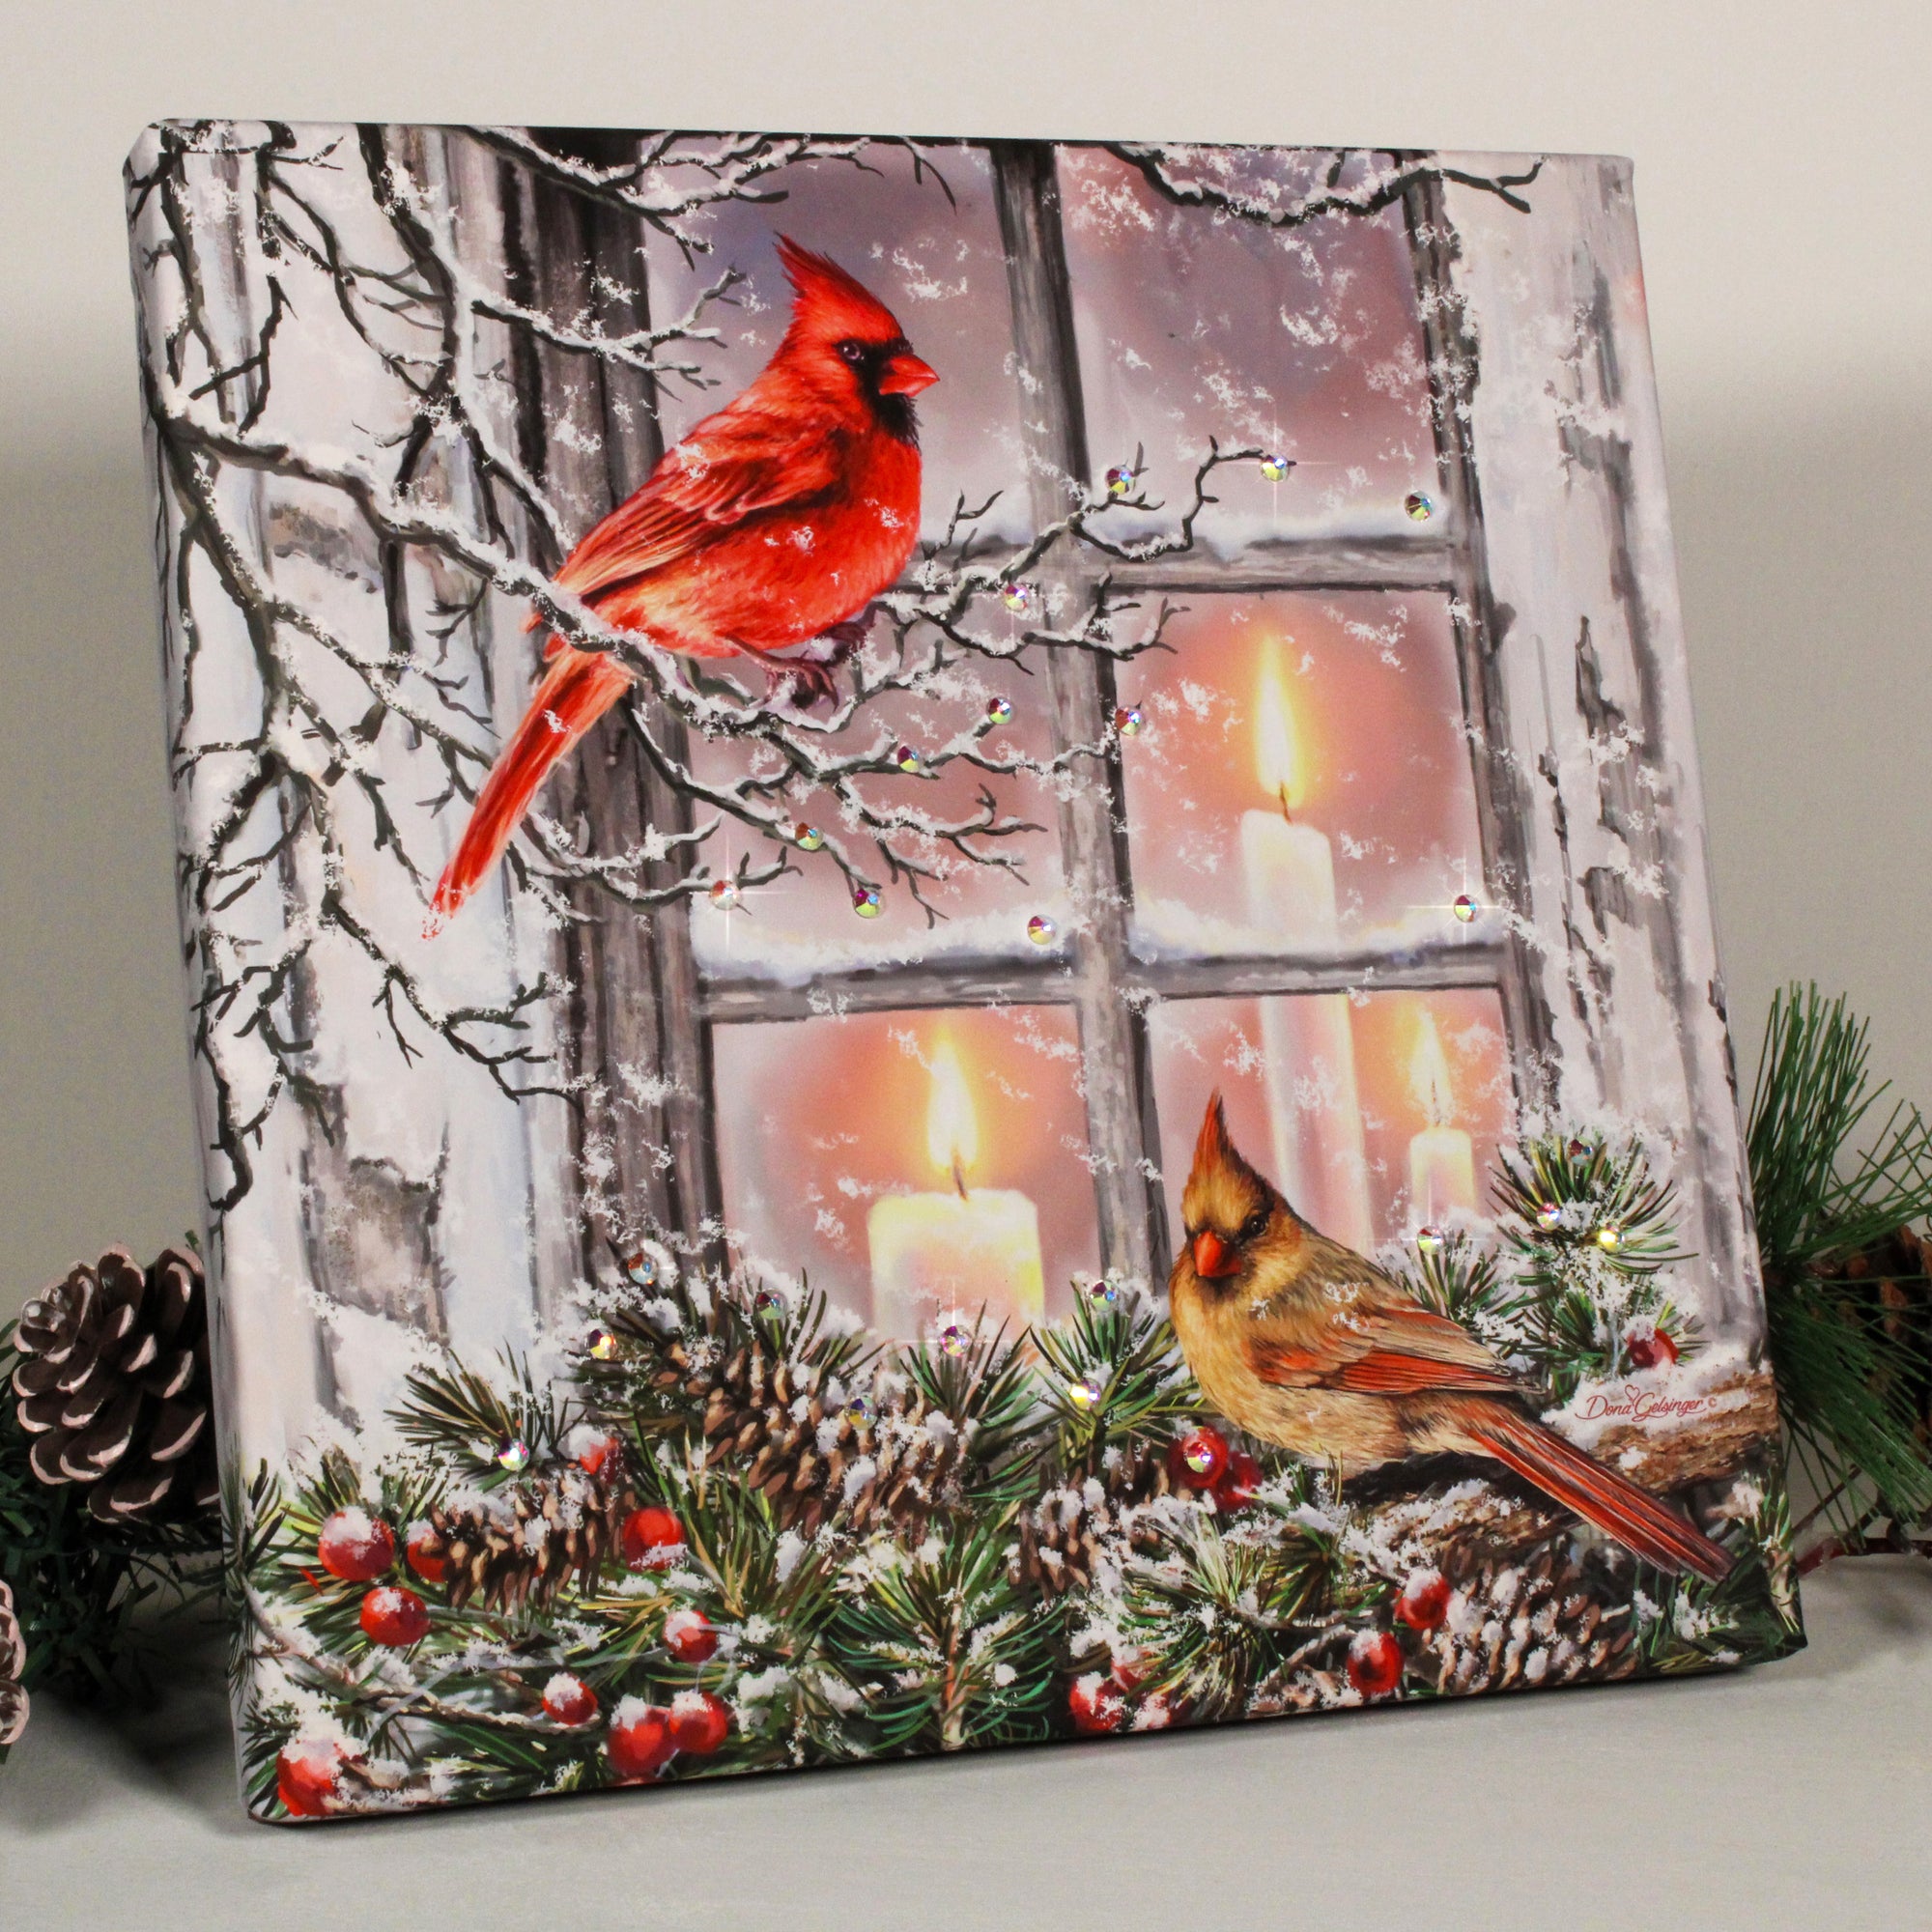 This enchanting work features two beautiful cardinals perched in a charming winter scene. One cardinal sits gracefully on a delicate branch, while the other perches atop a garland that adorns the window frame. The window itself is adorned with three lit candles.